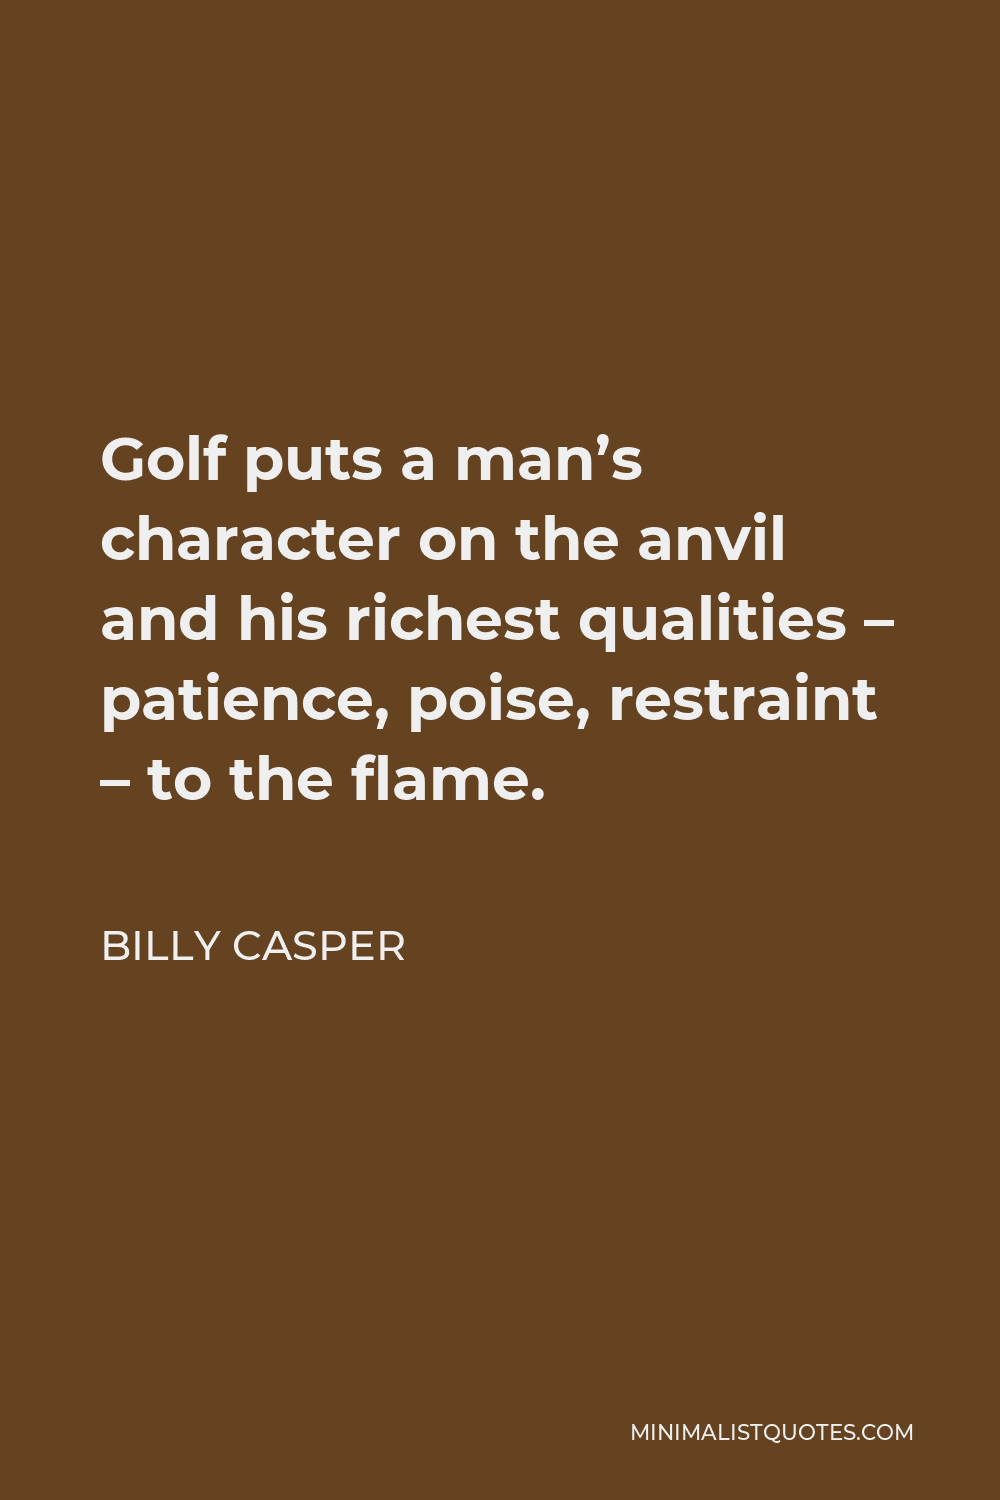 Billy Casper Quote - Golf puts a man’s character on the anvil and his richest qualities – patience, poise, restraint – to the flame.